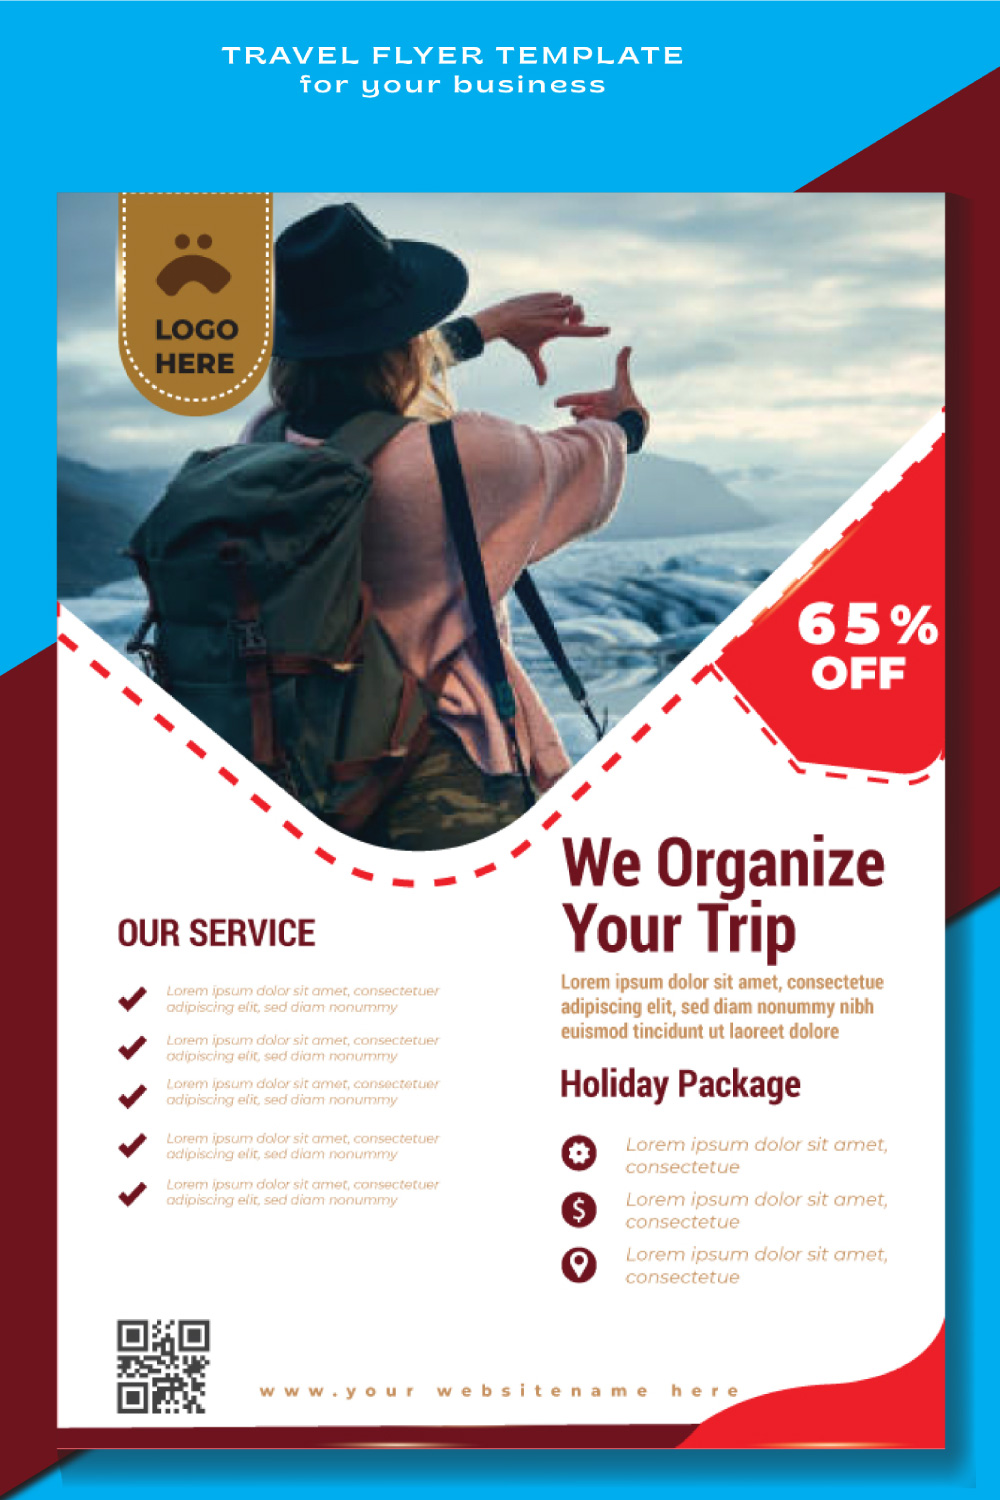 Travel flyer templatetravel tour flyer template for your business travel flyer design pinterest preview image.